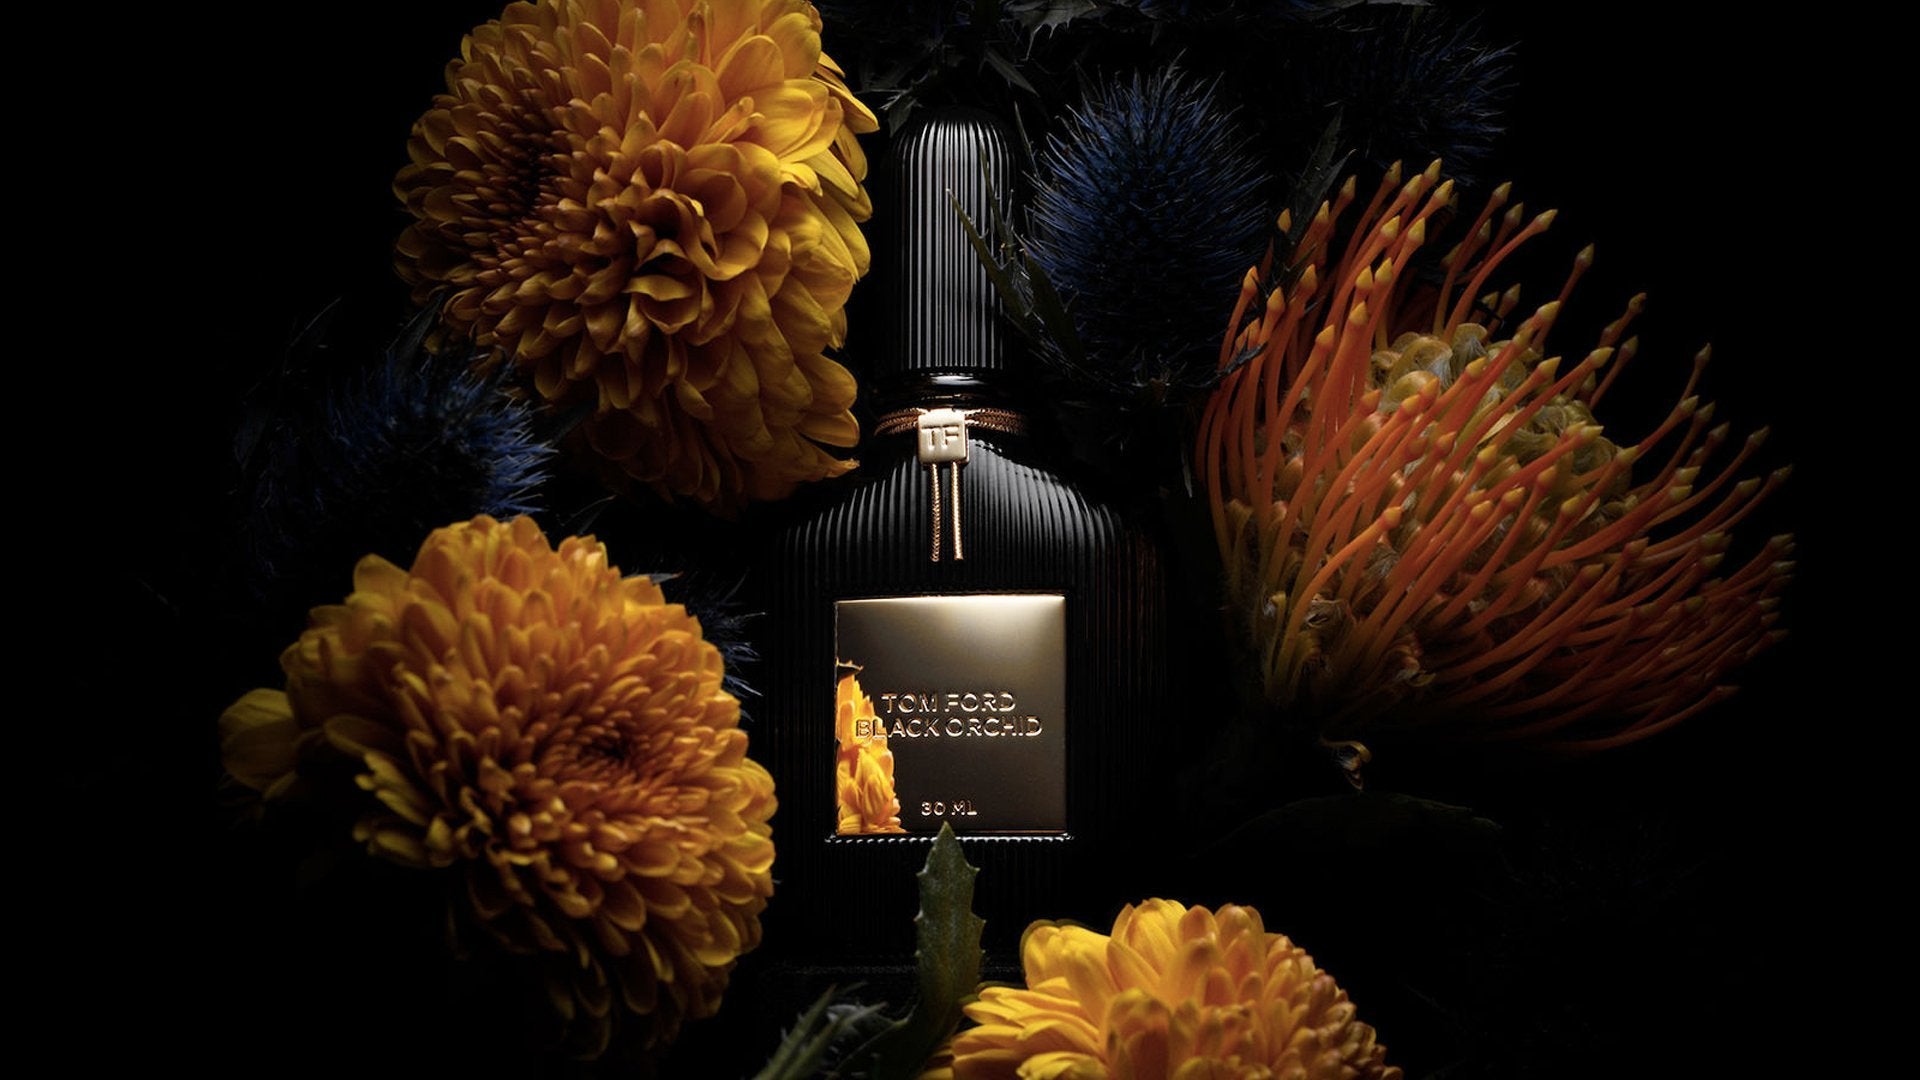 TOM FORD Velvet Orchid vs. Black Orchid: What's the Difference?